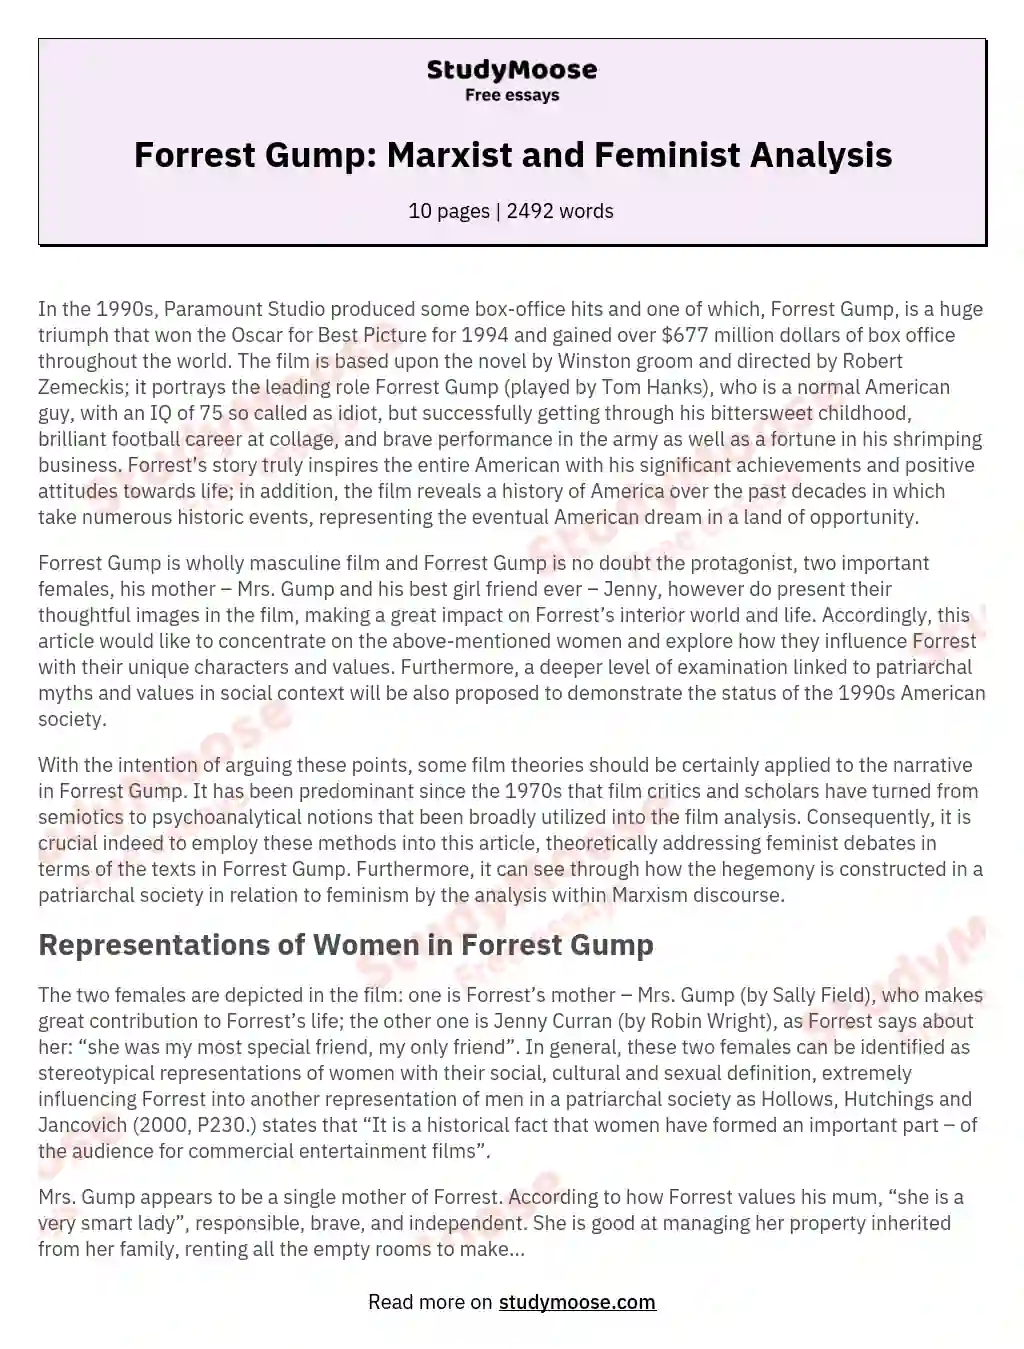 Forrest Gump: Marxist and Feminist Analysis essay